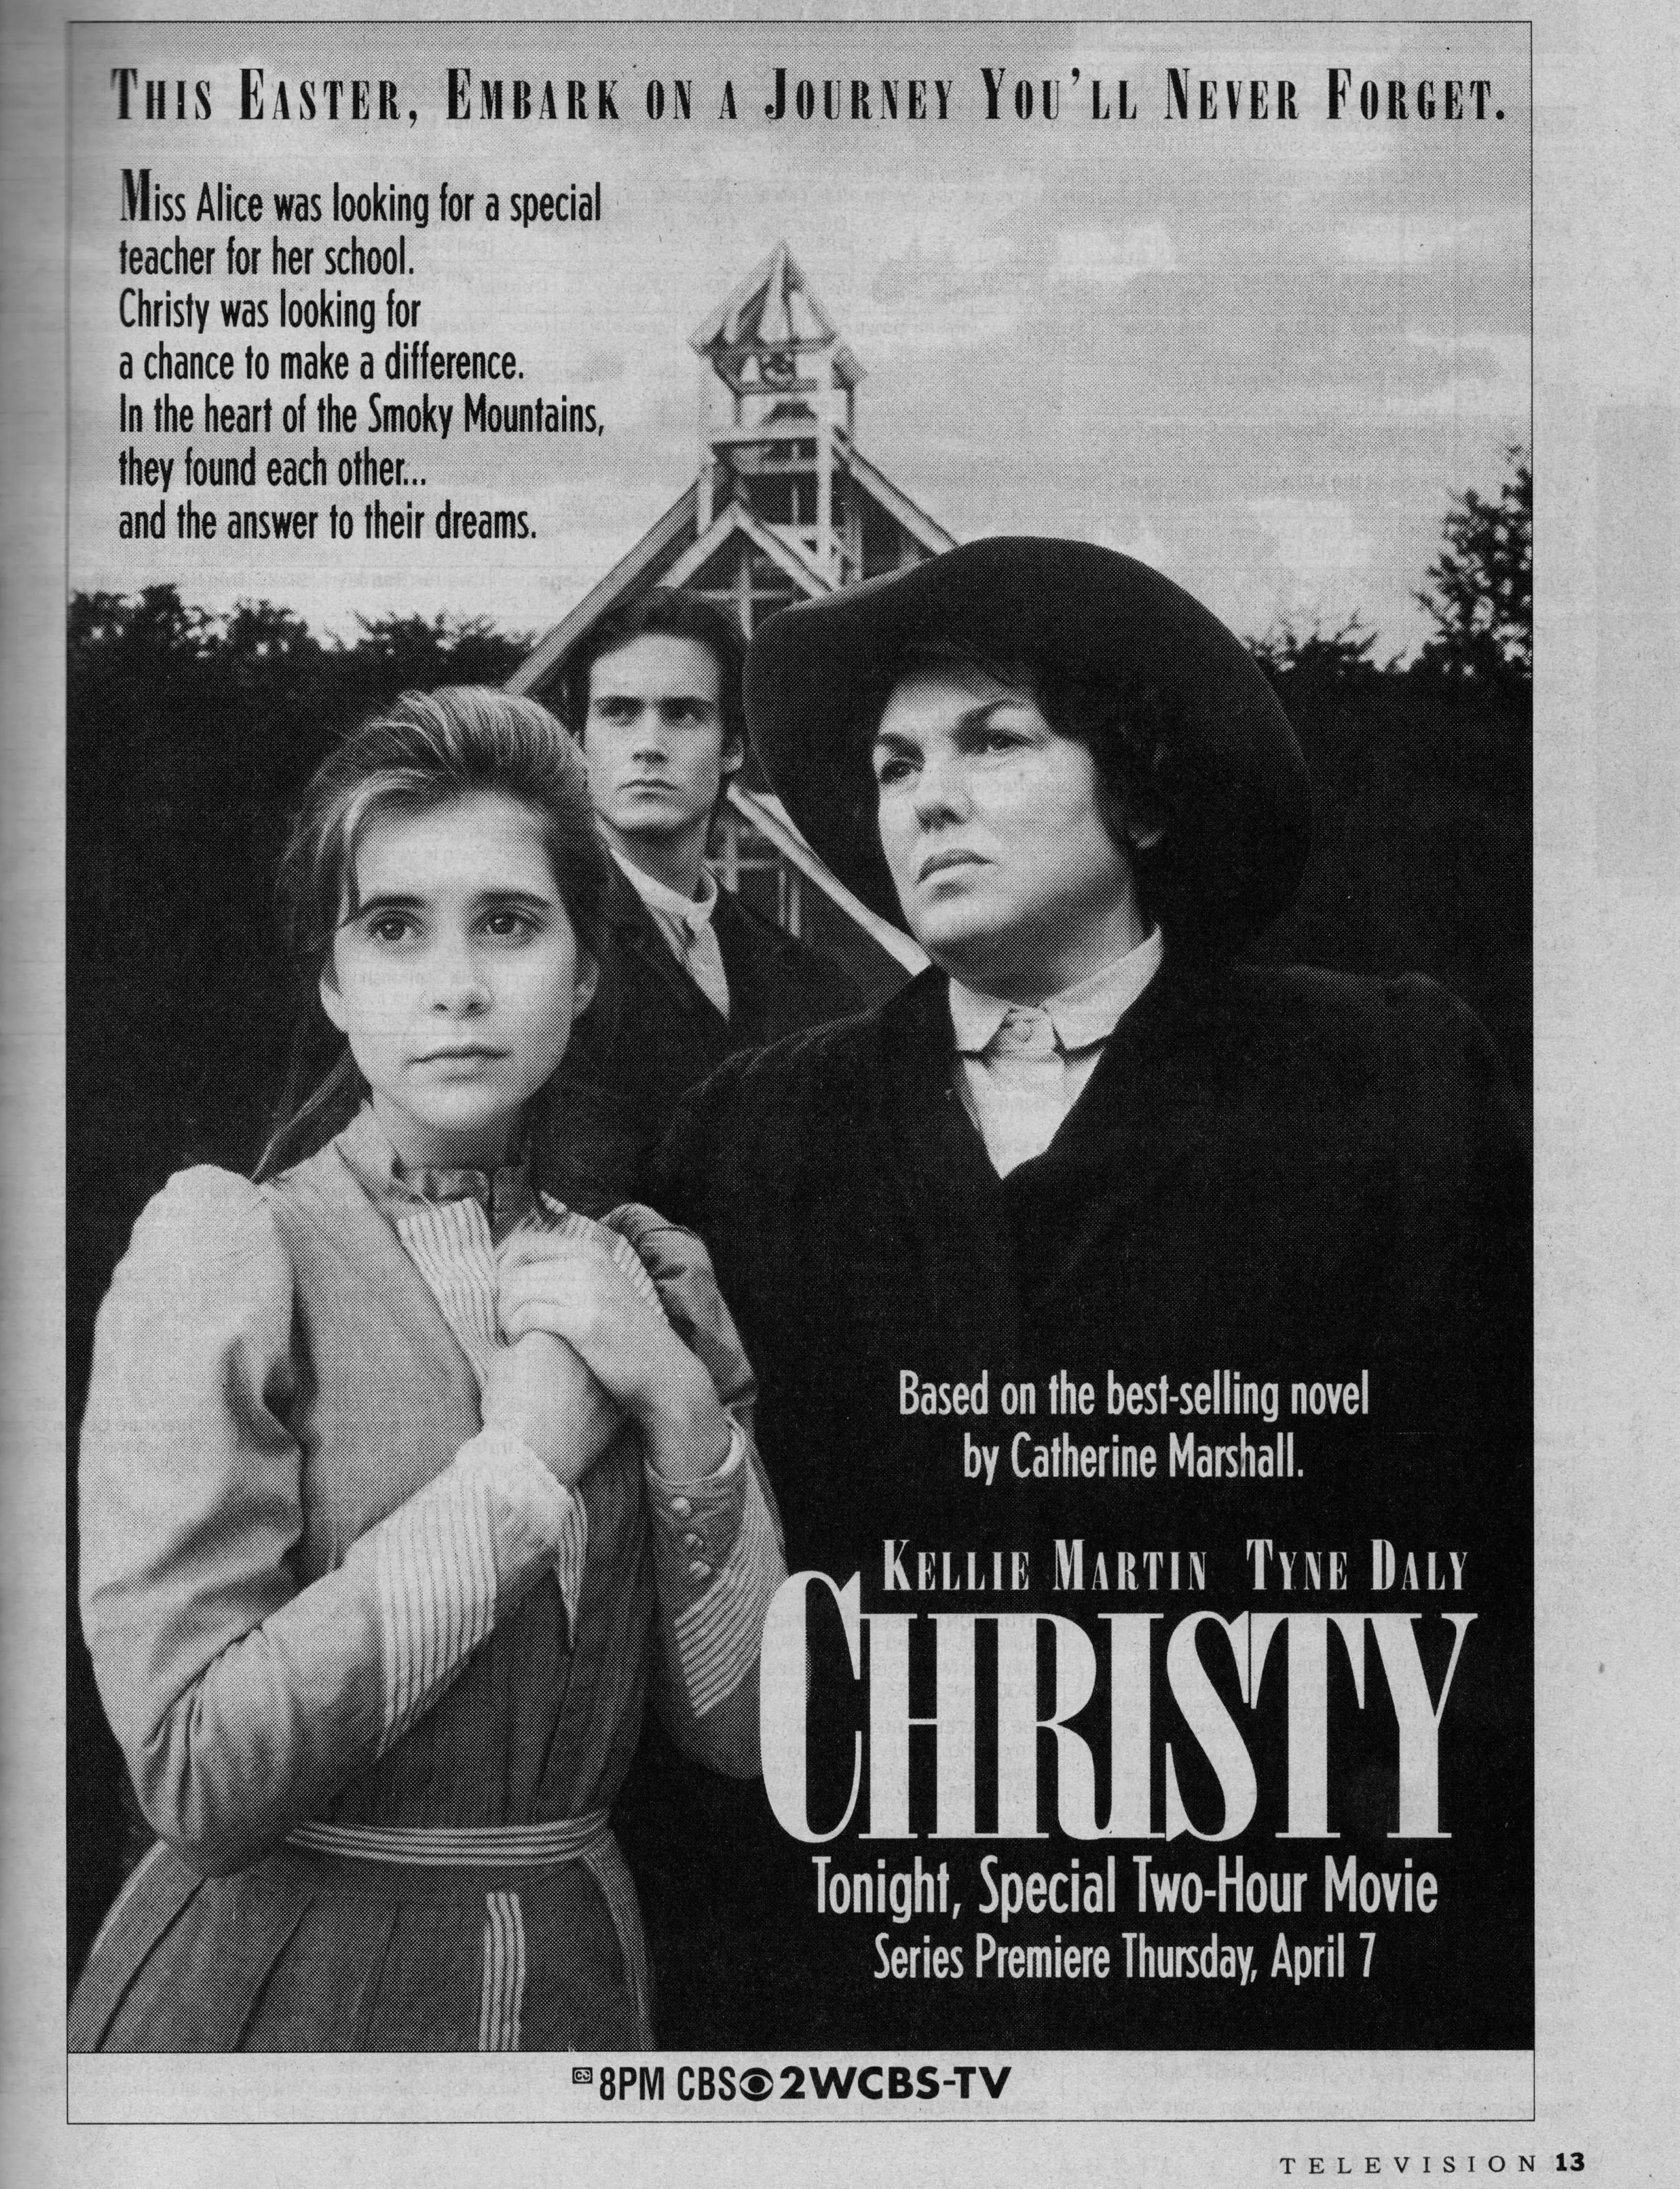 Christy ad in The New York Times